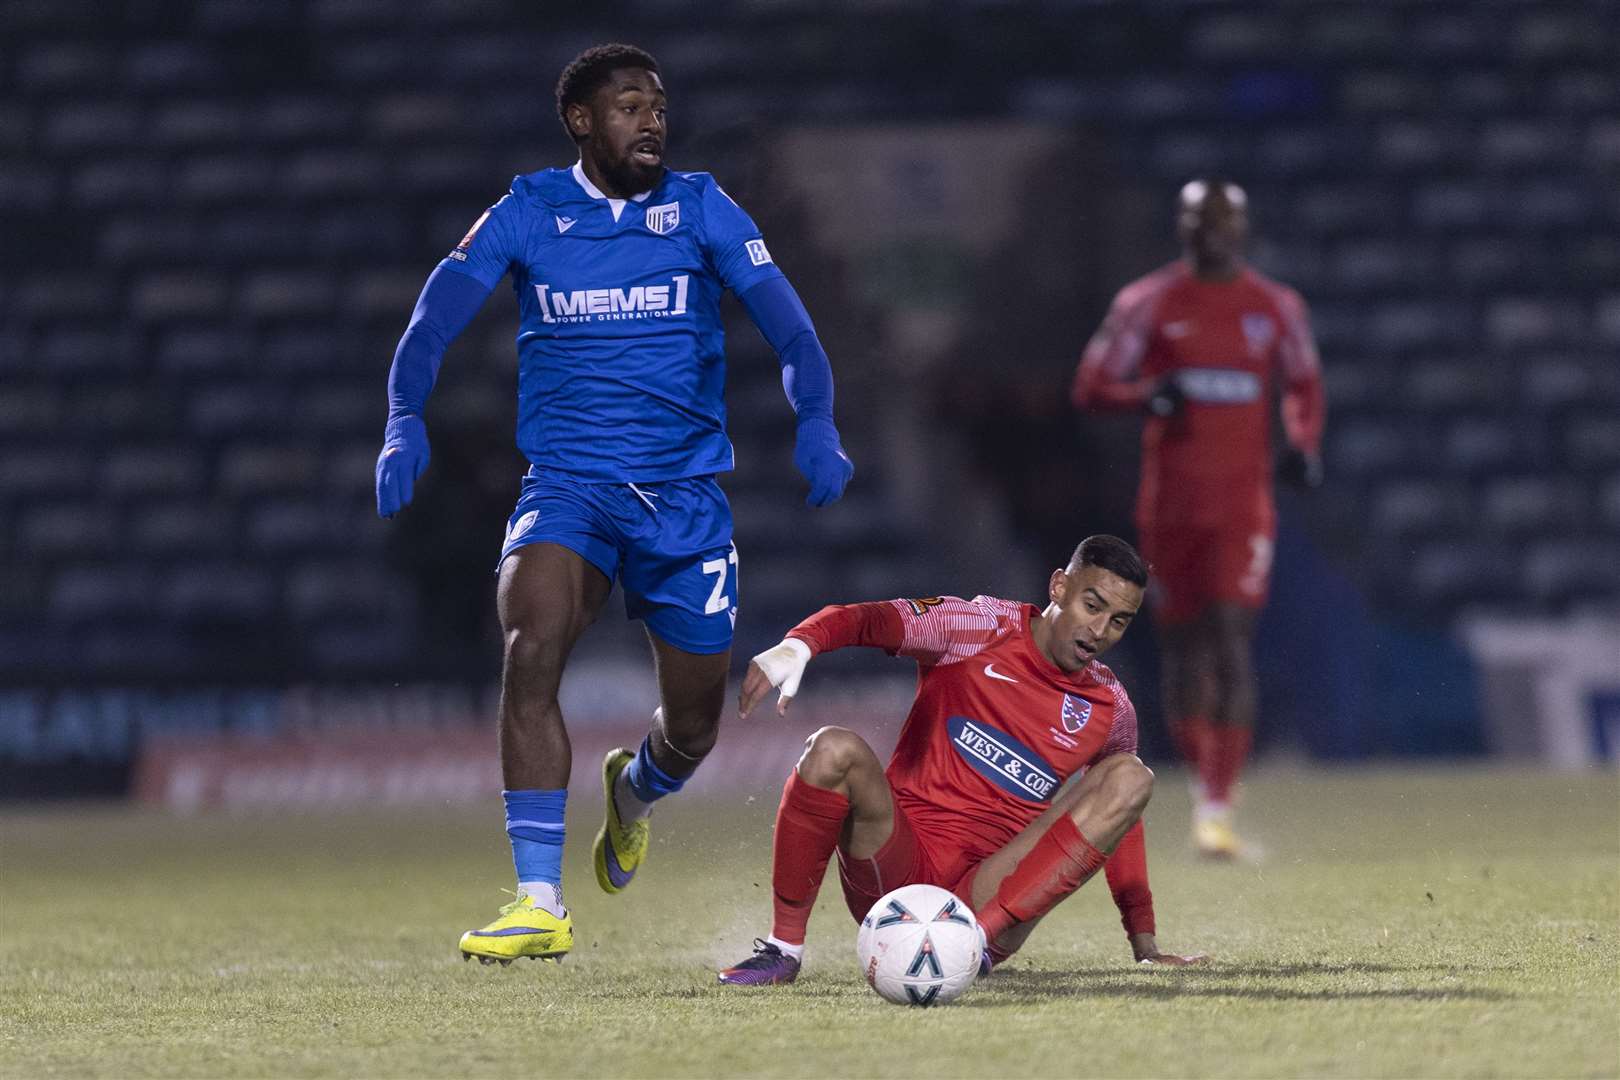 The Priestfield pitch was icing up during their match with Dagenham on Thursday and it's game off this Sunday